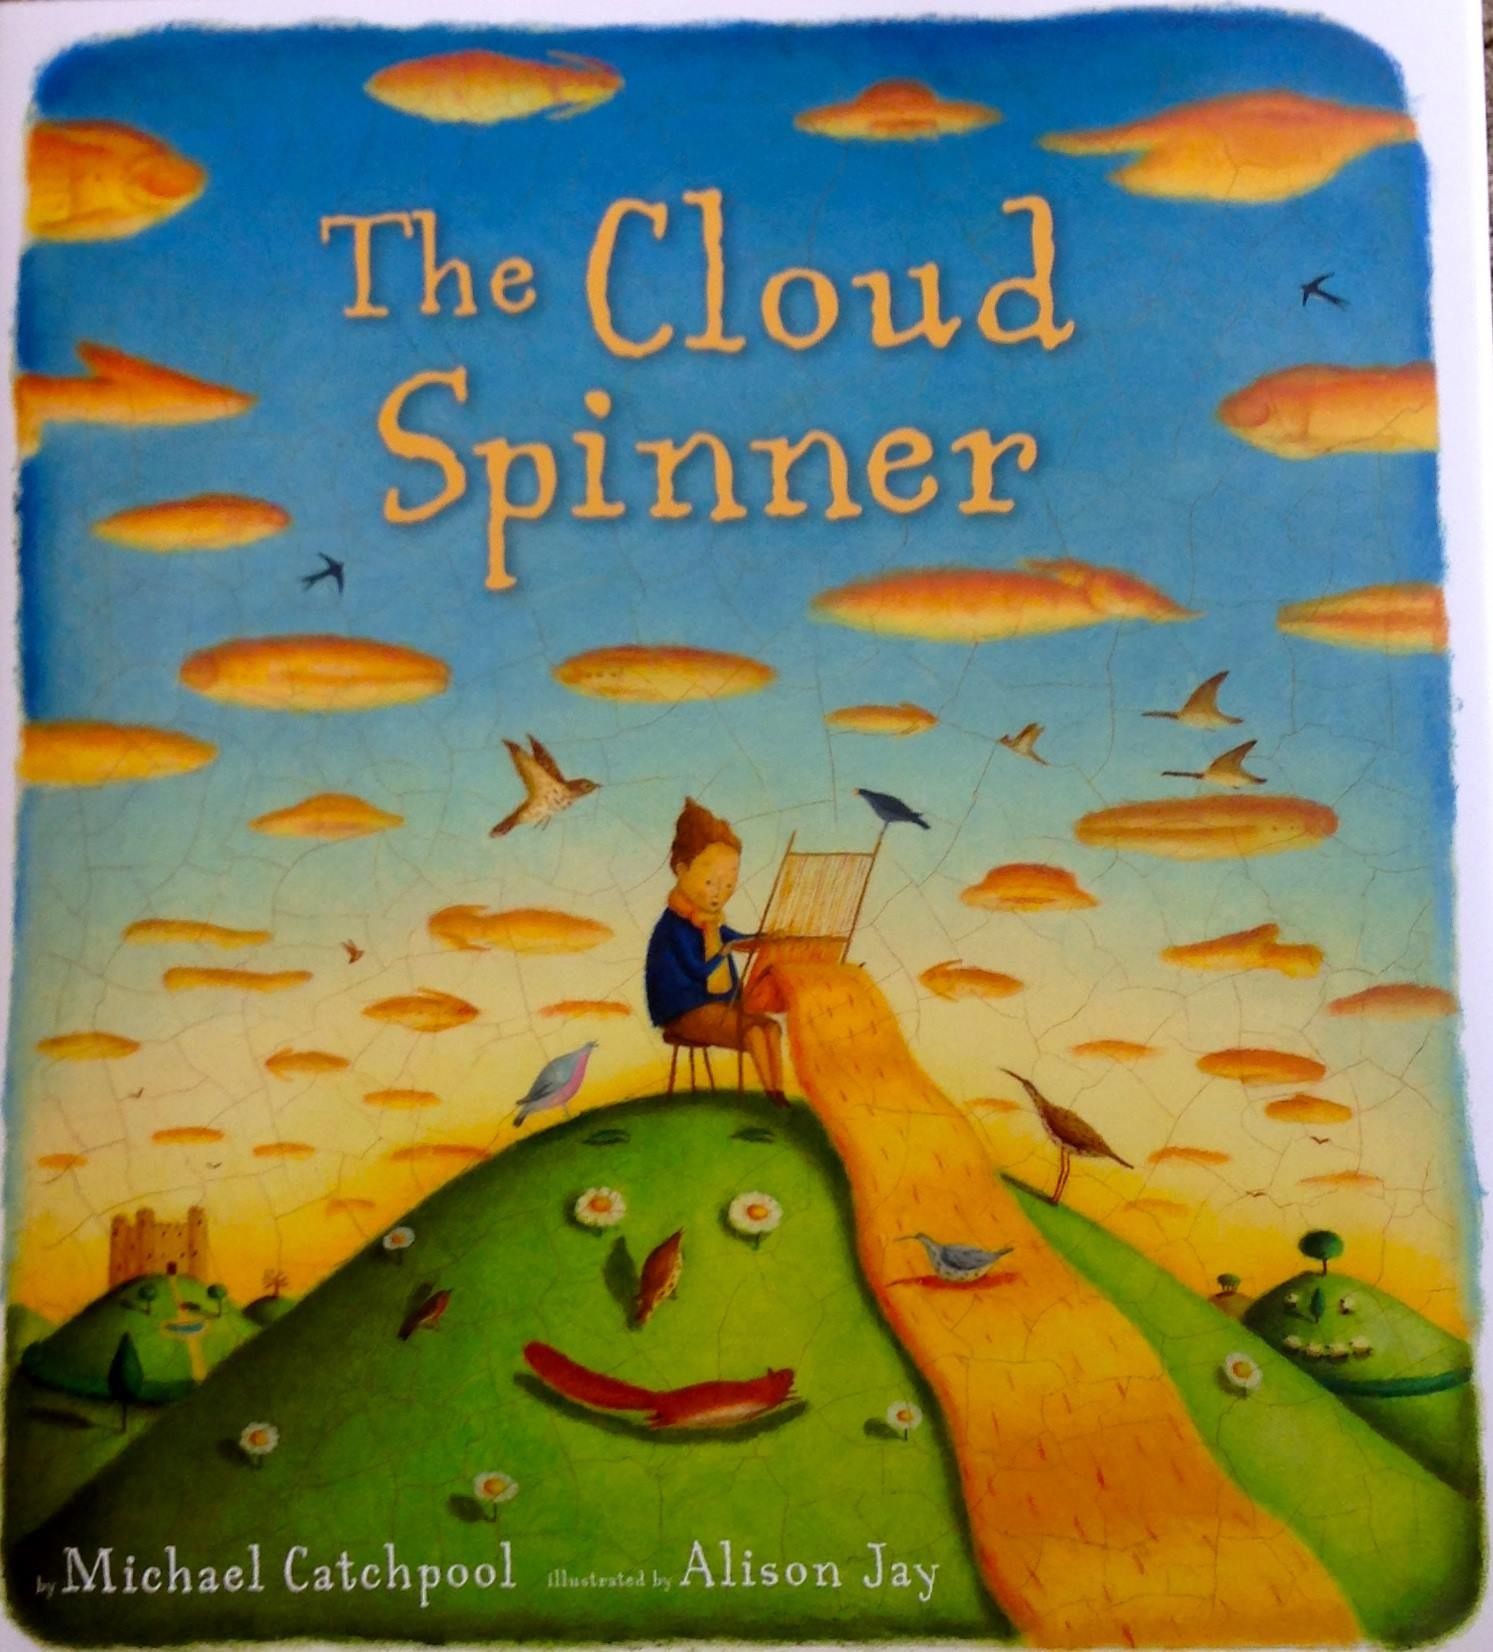 The Cloud Spinner - book cover